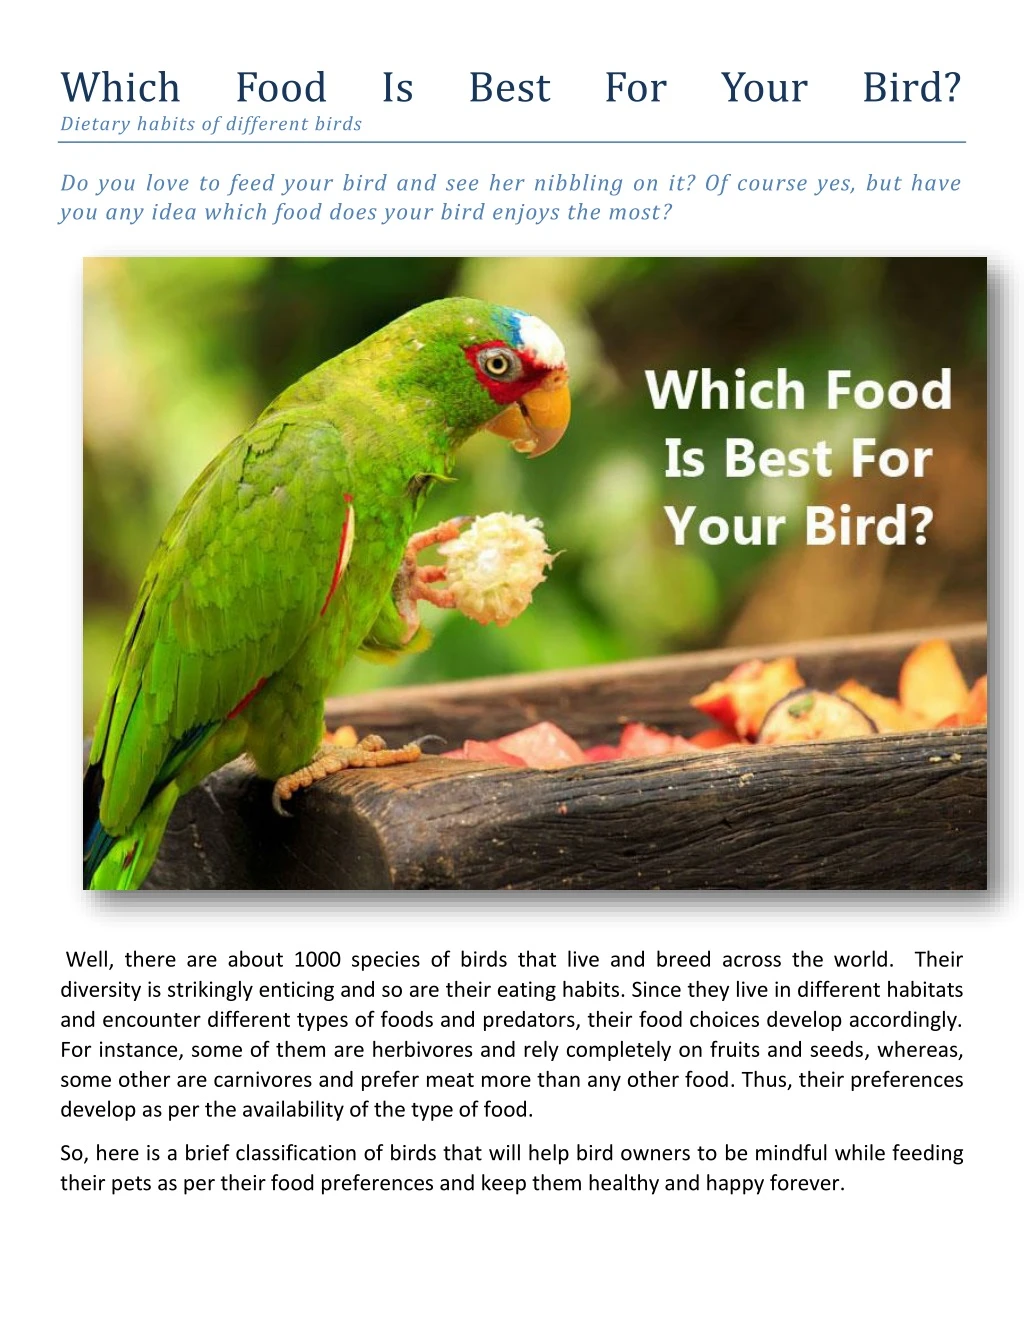 which dietary habits of different birds